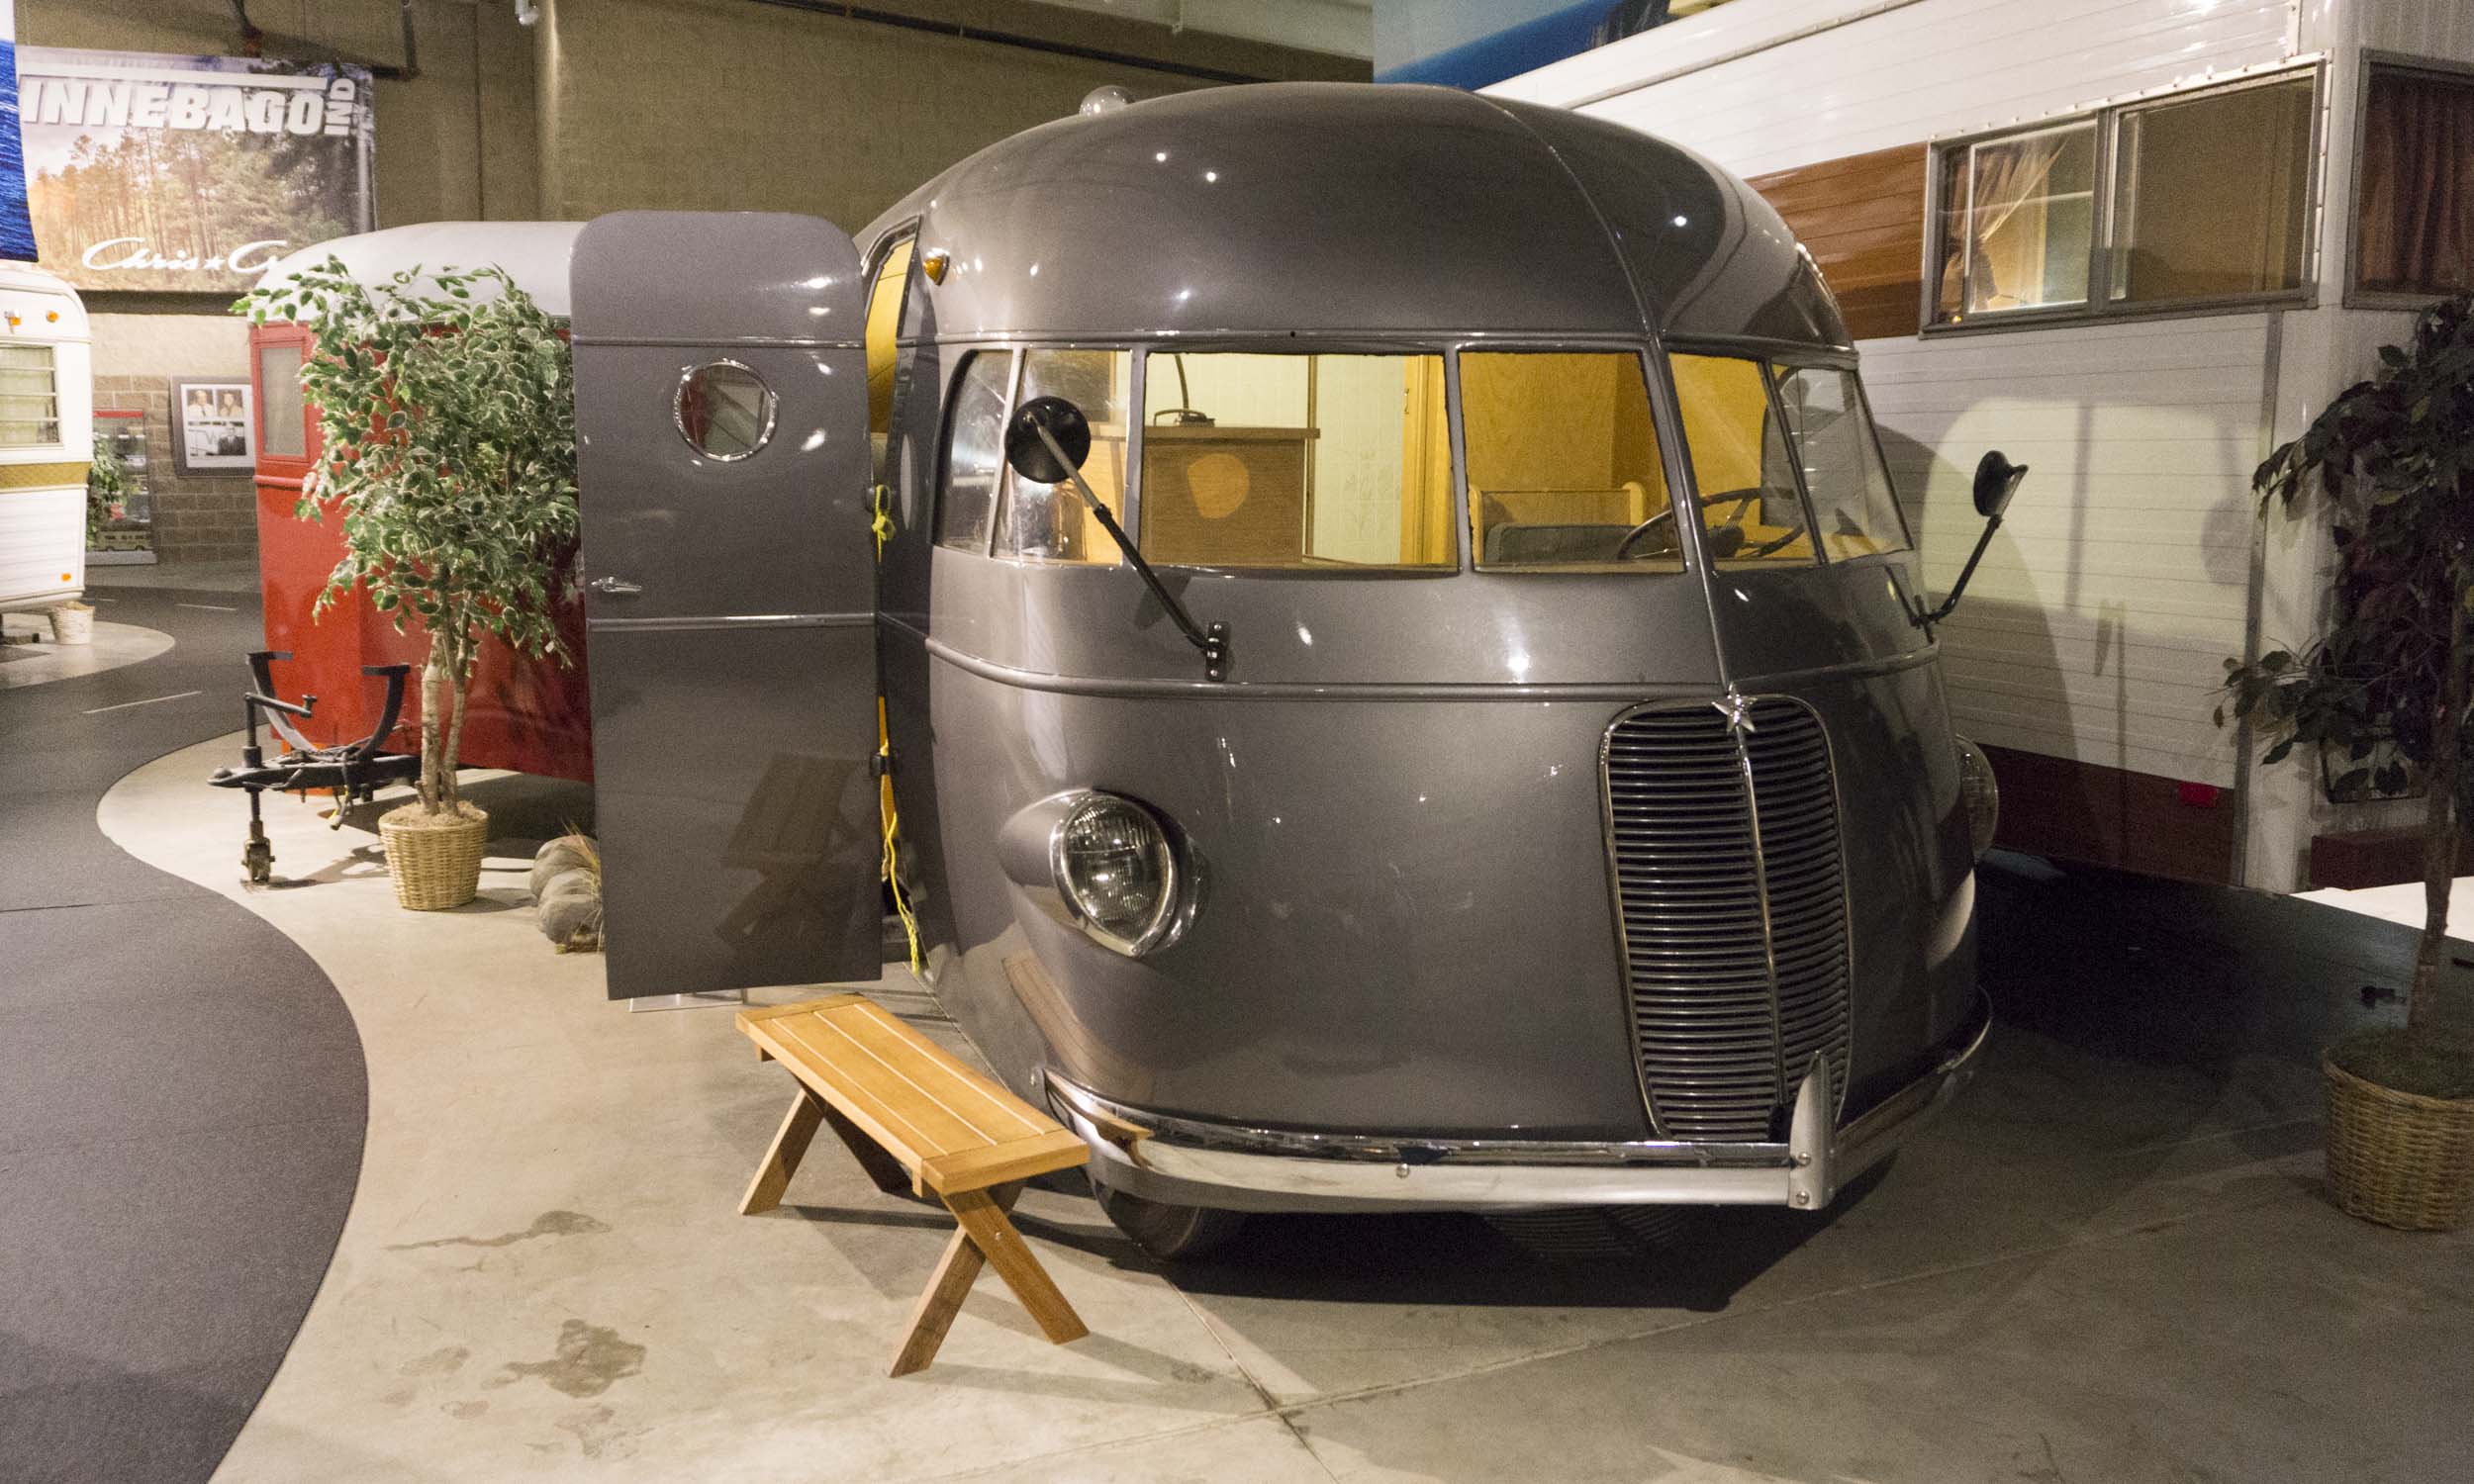 Remembering The 1937 Hunt Housecar The First Private Rv With A